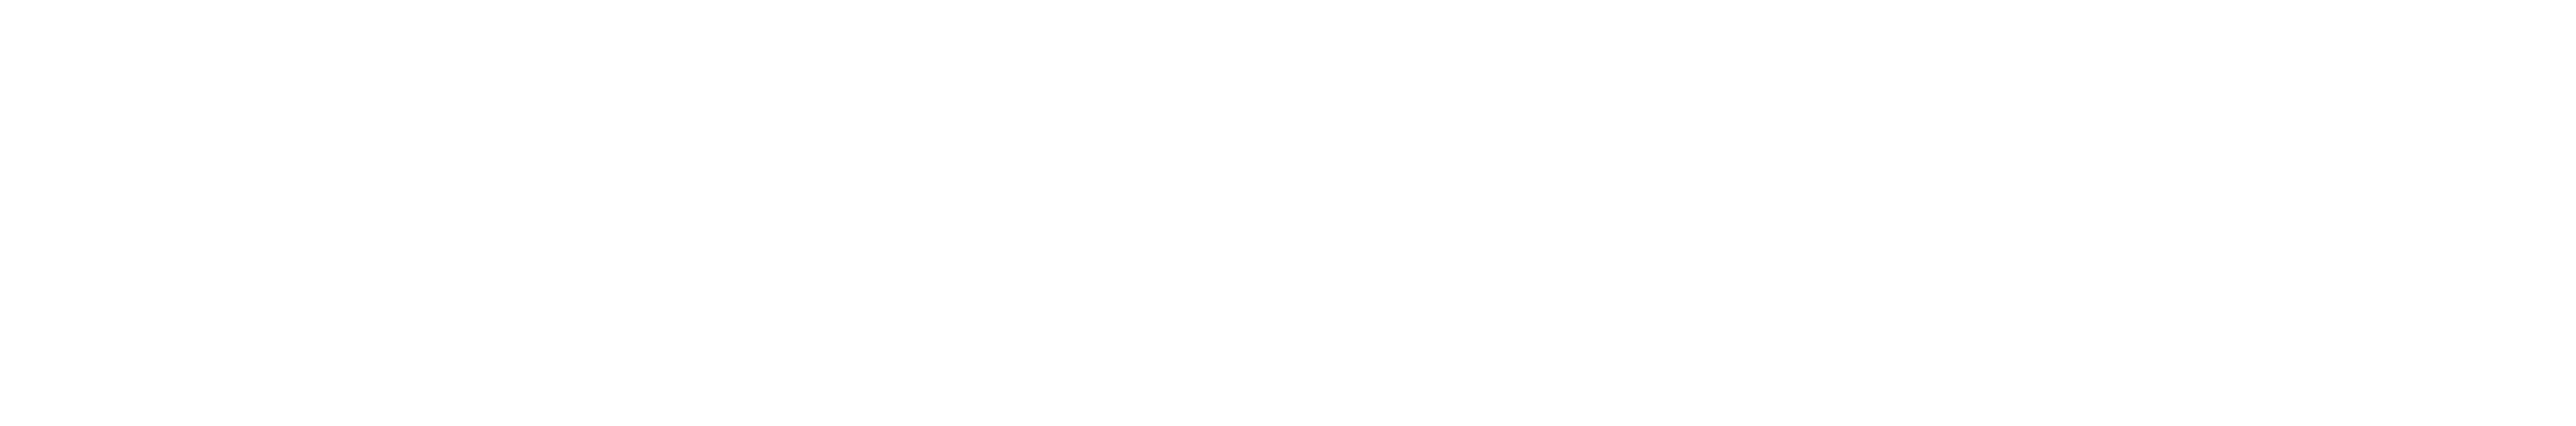 Clarity Private Wealth Solutions